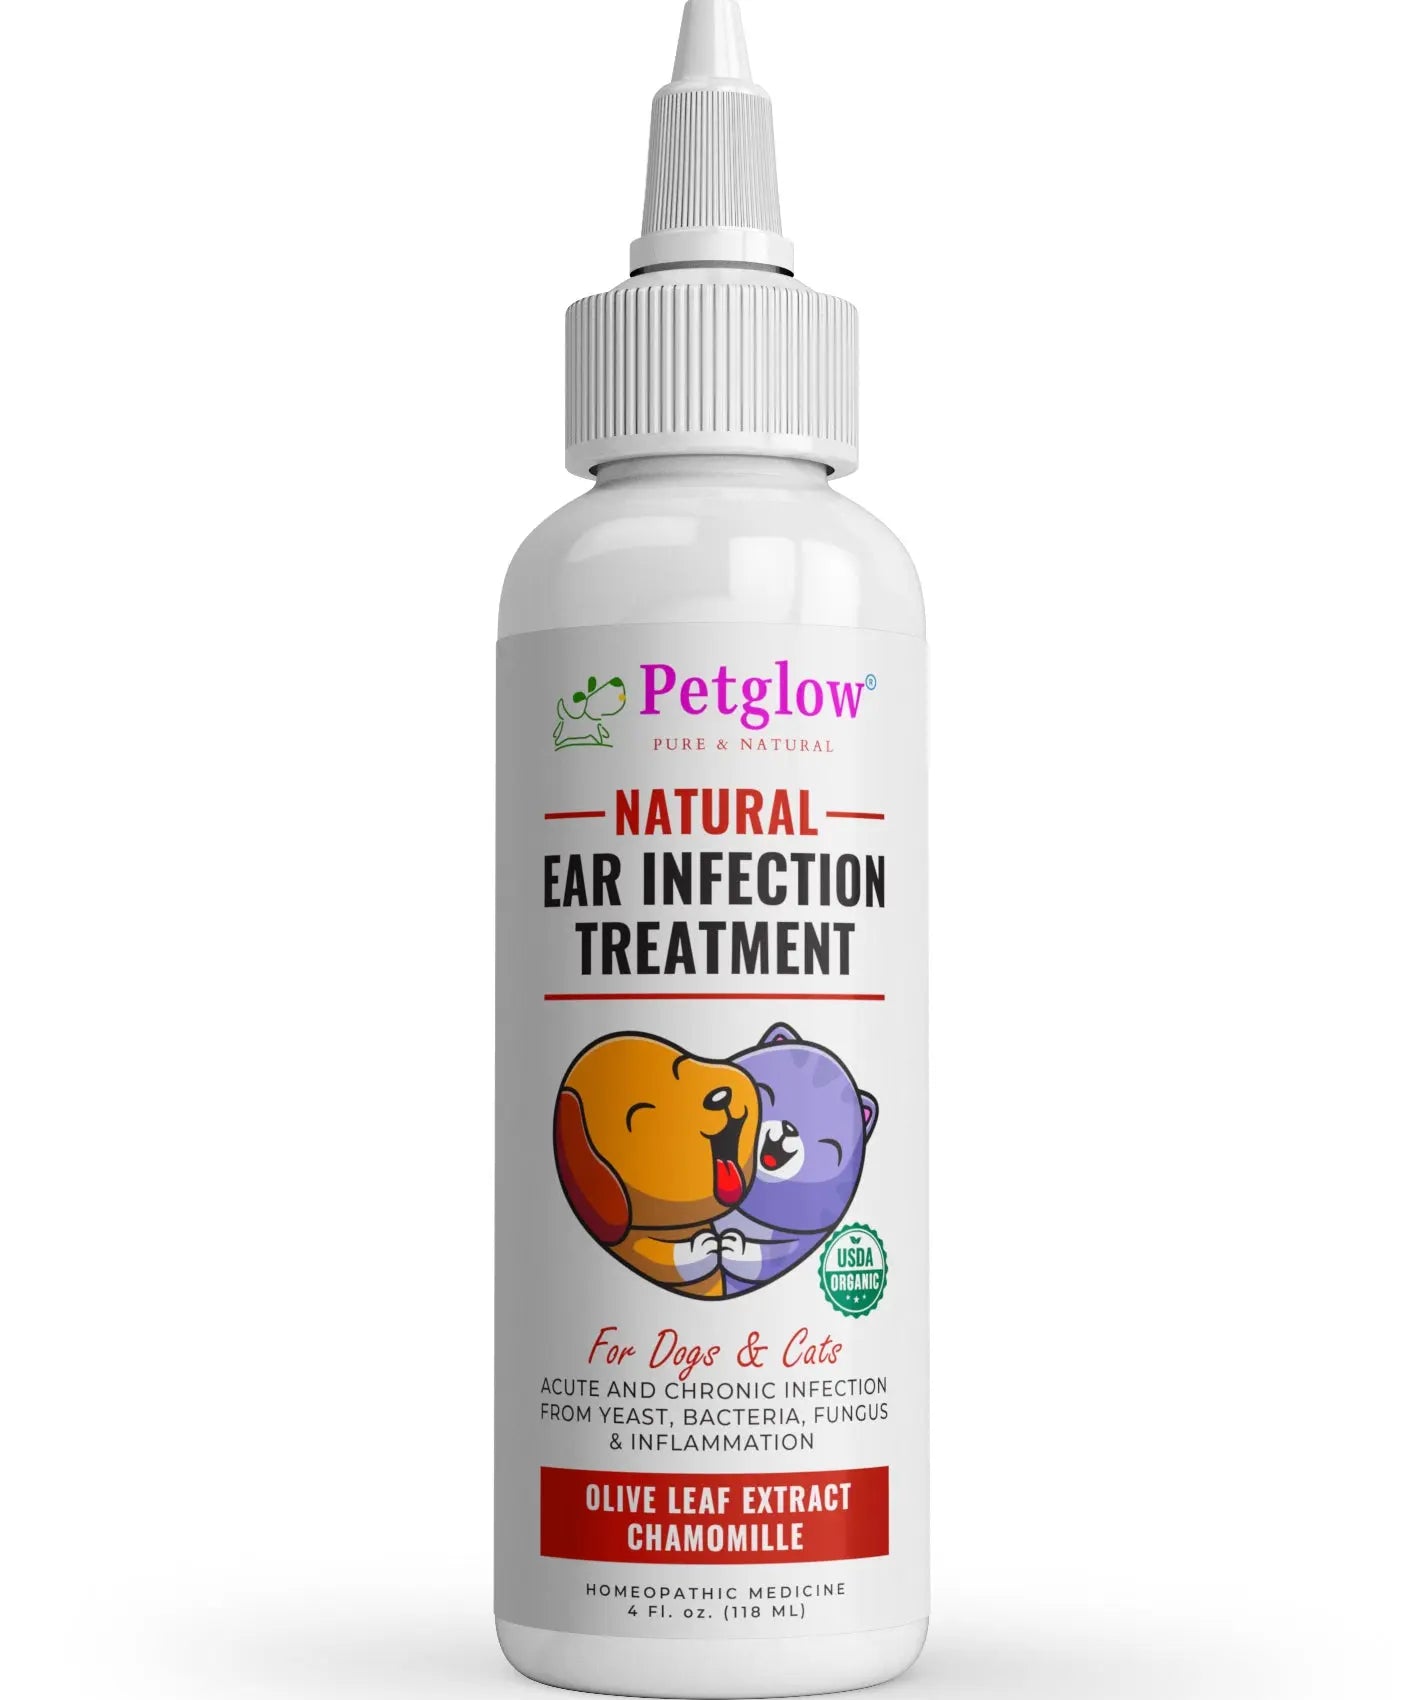 Dog and Cat Ear Infection from Bacteria, Yeast and Fungus treatment. N